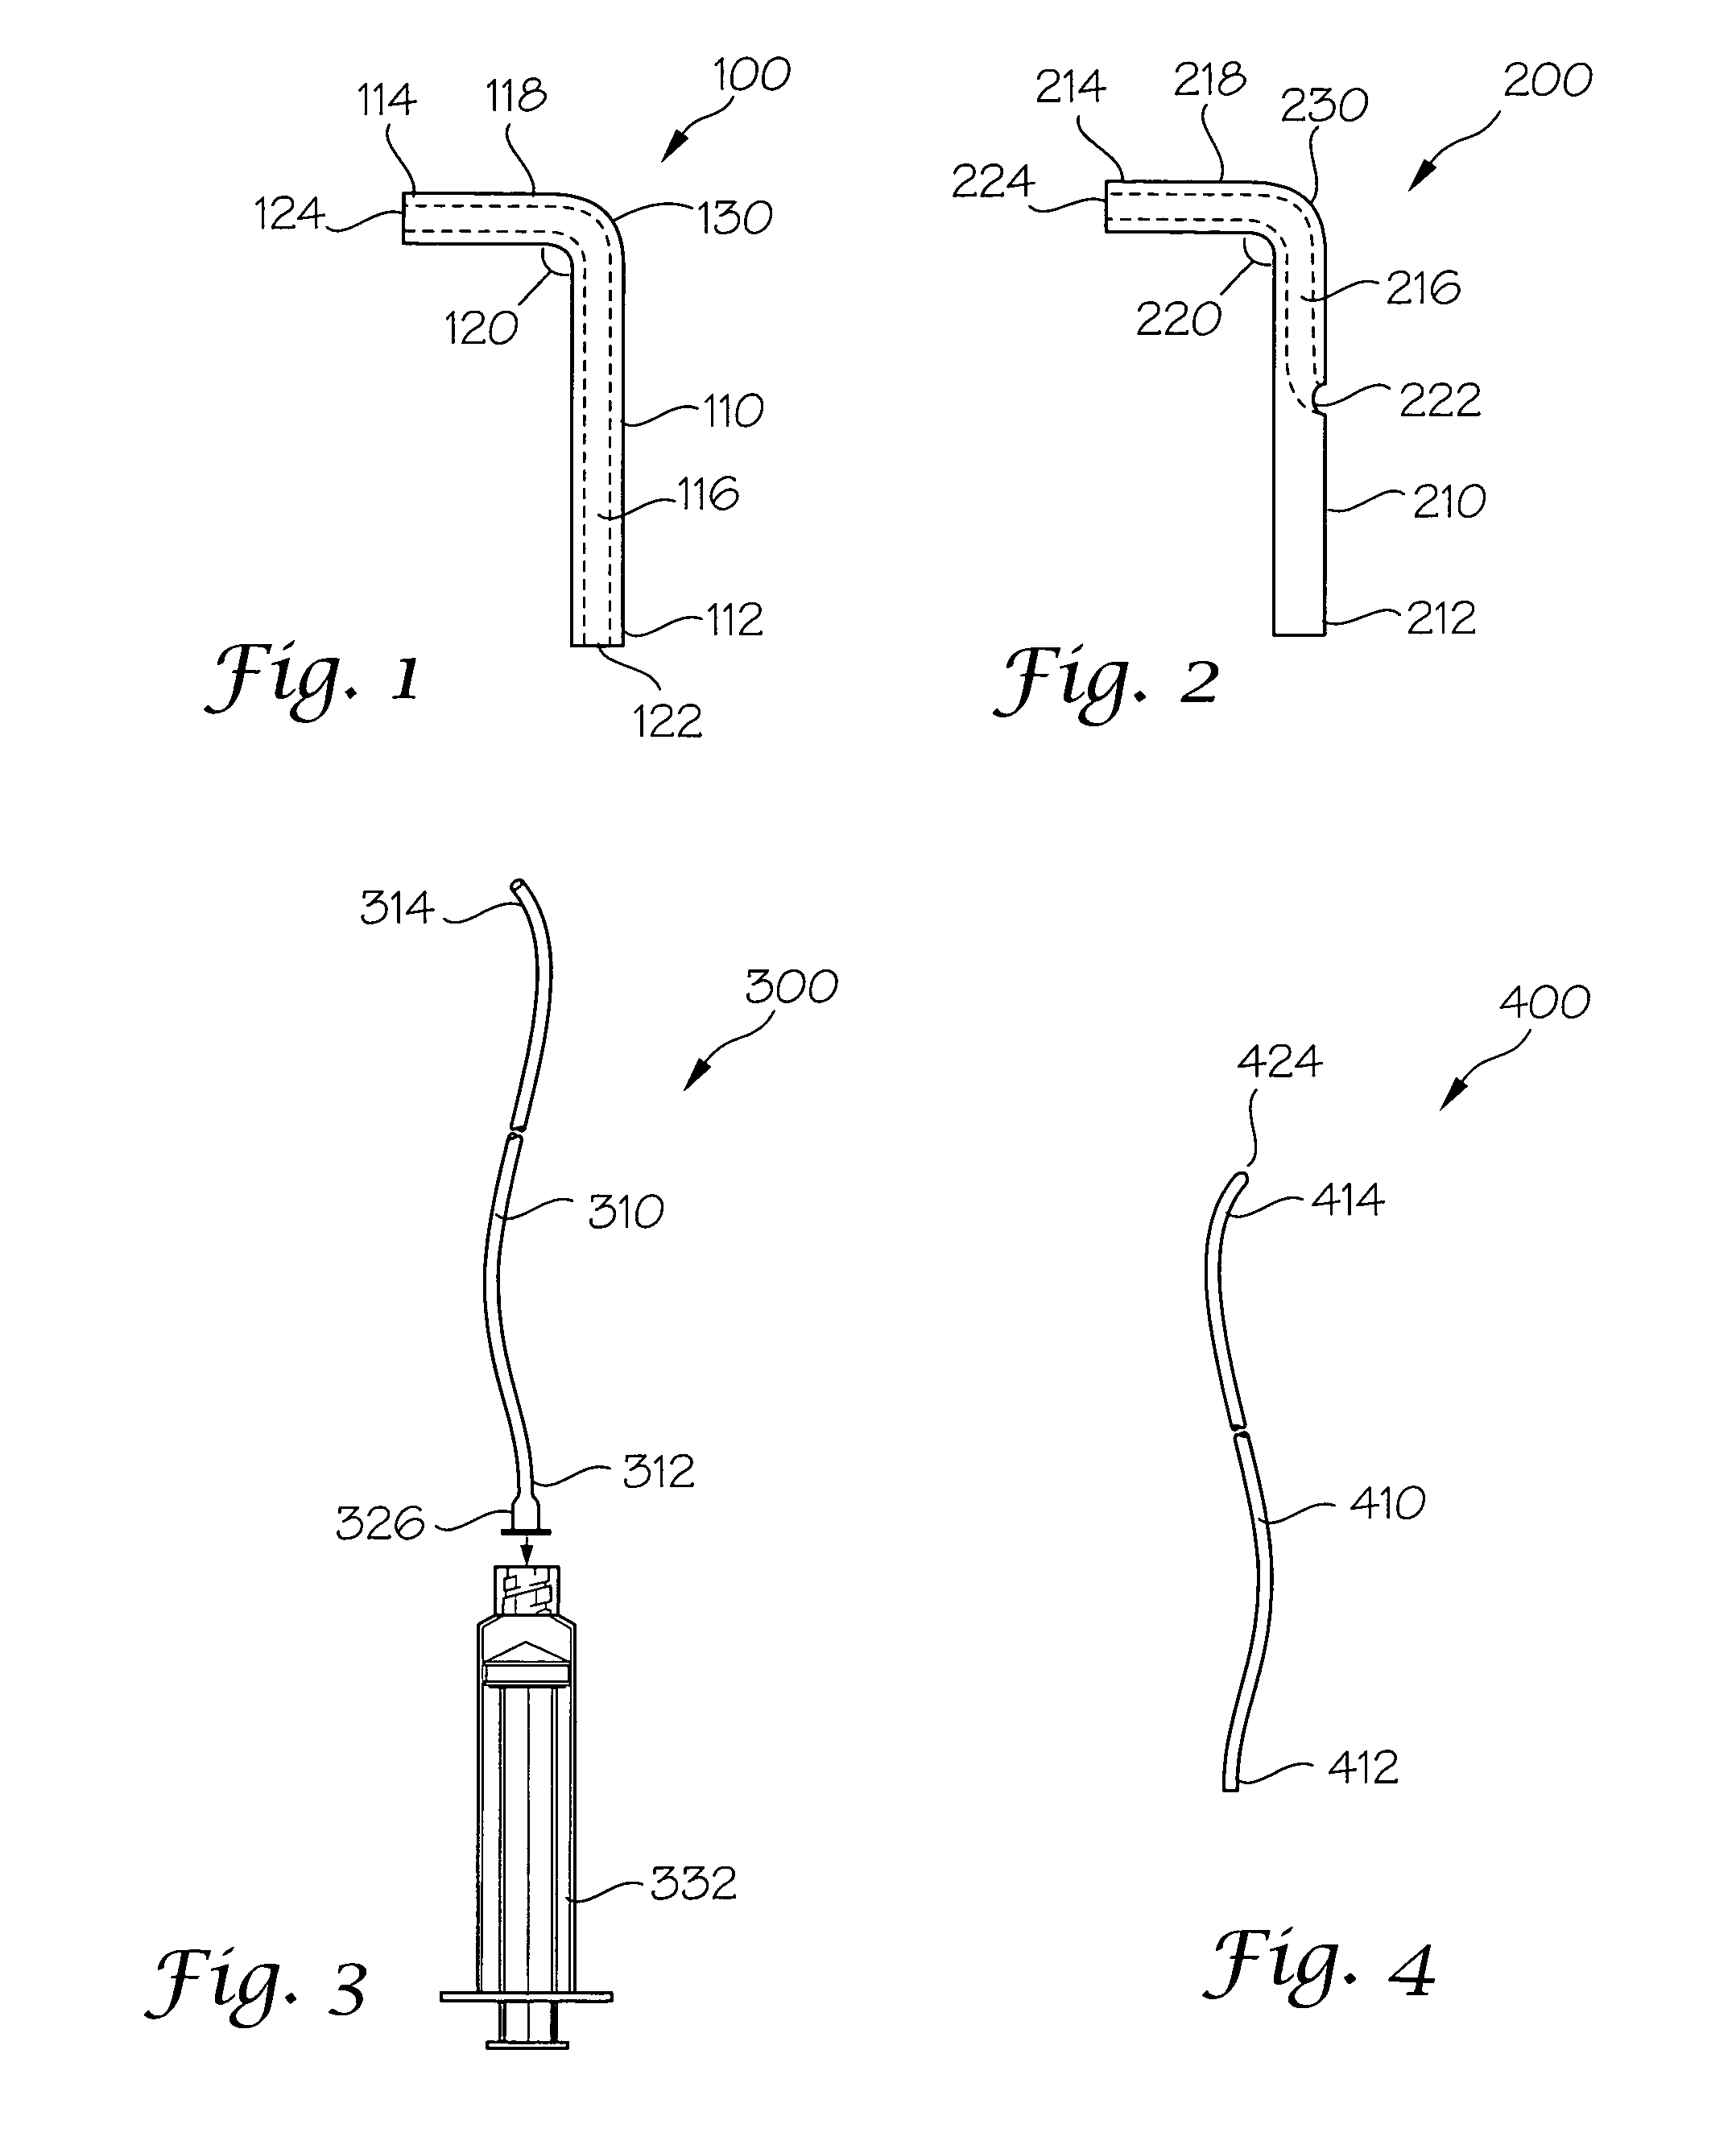 Methods and apparatus for intraoperative administration of analgesia